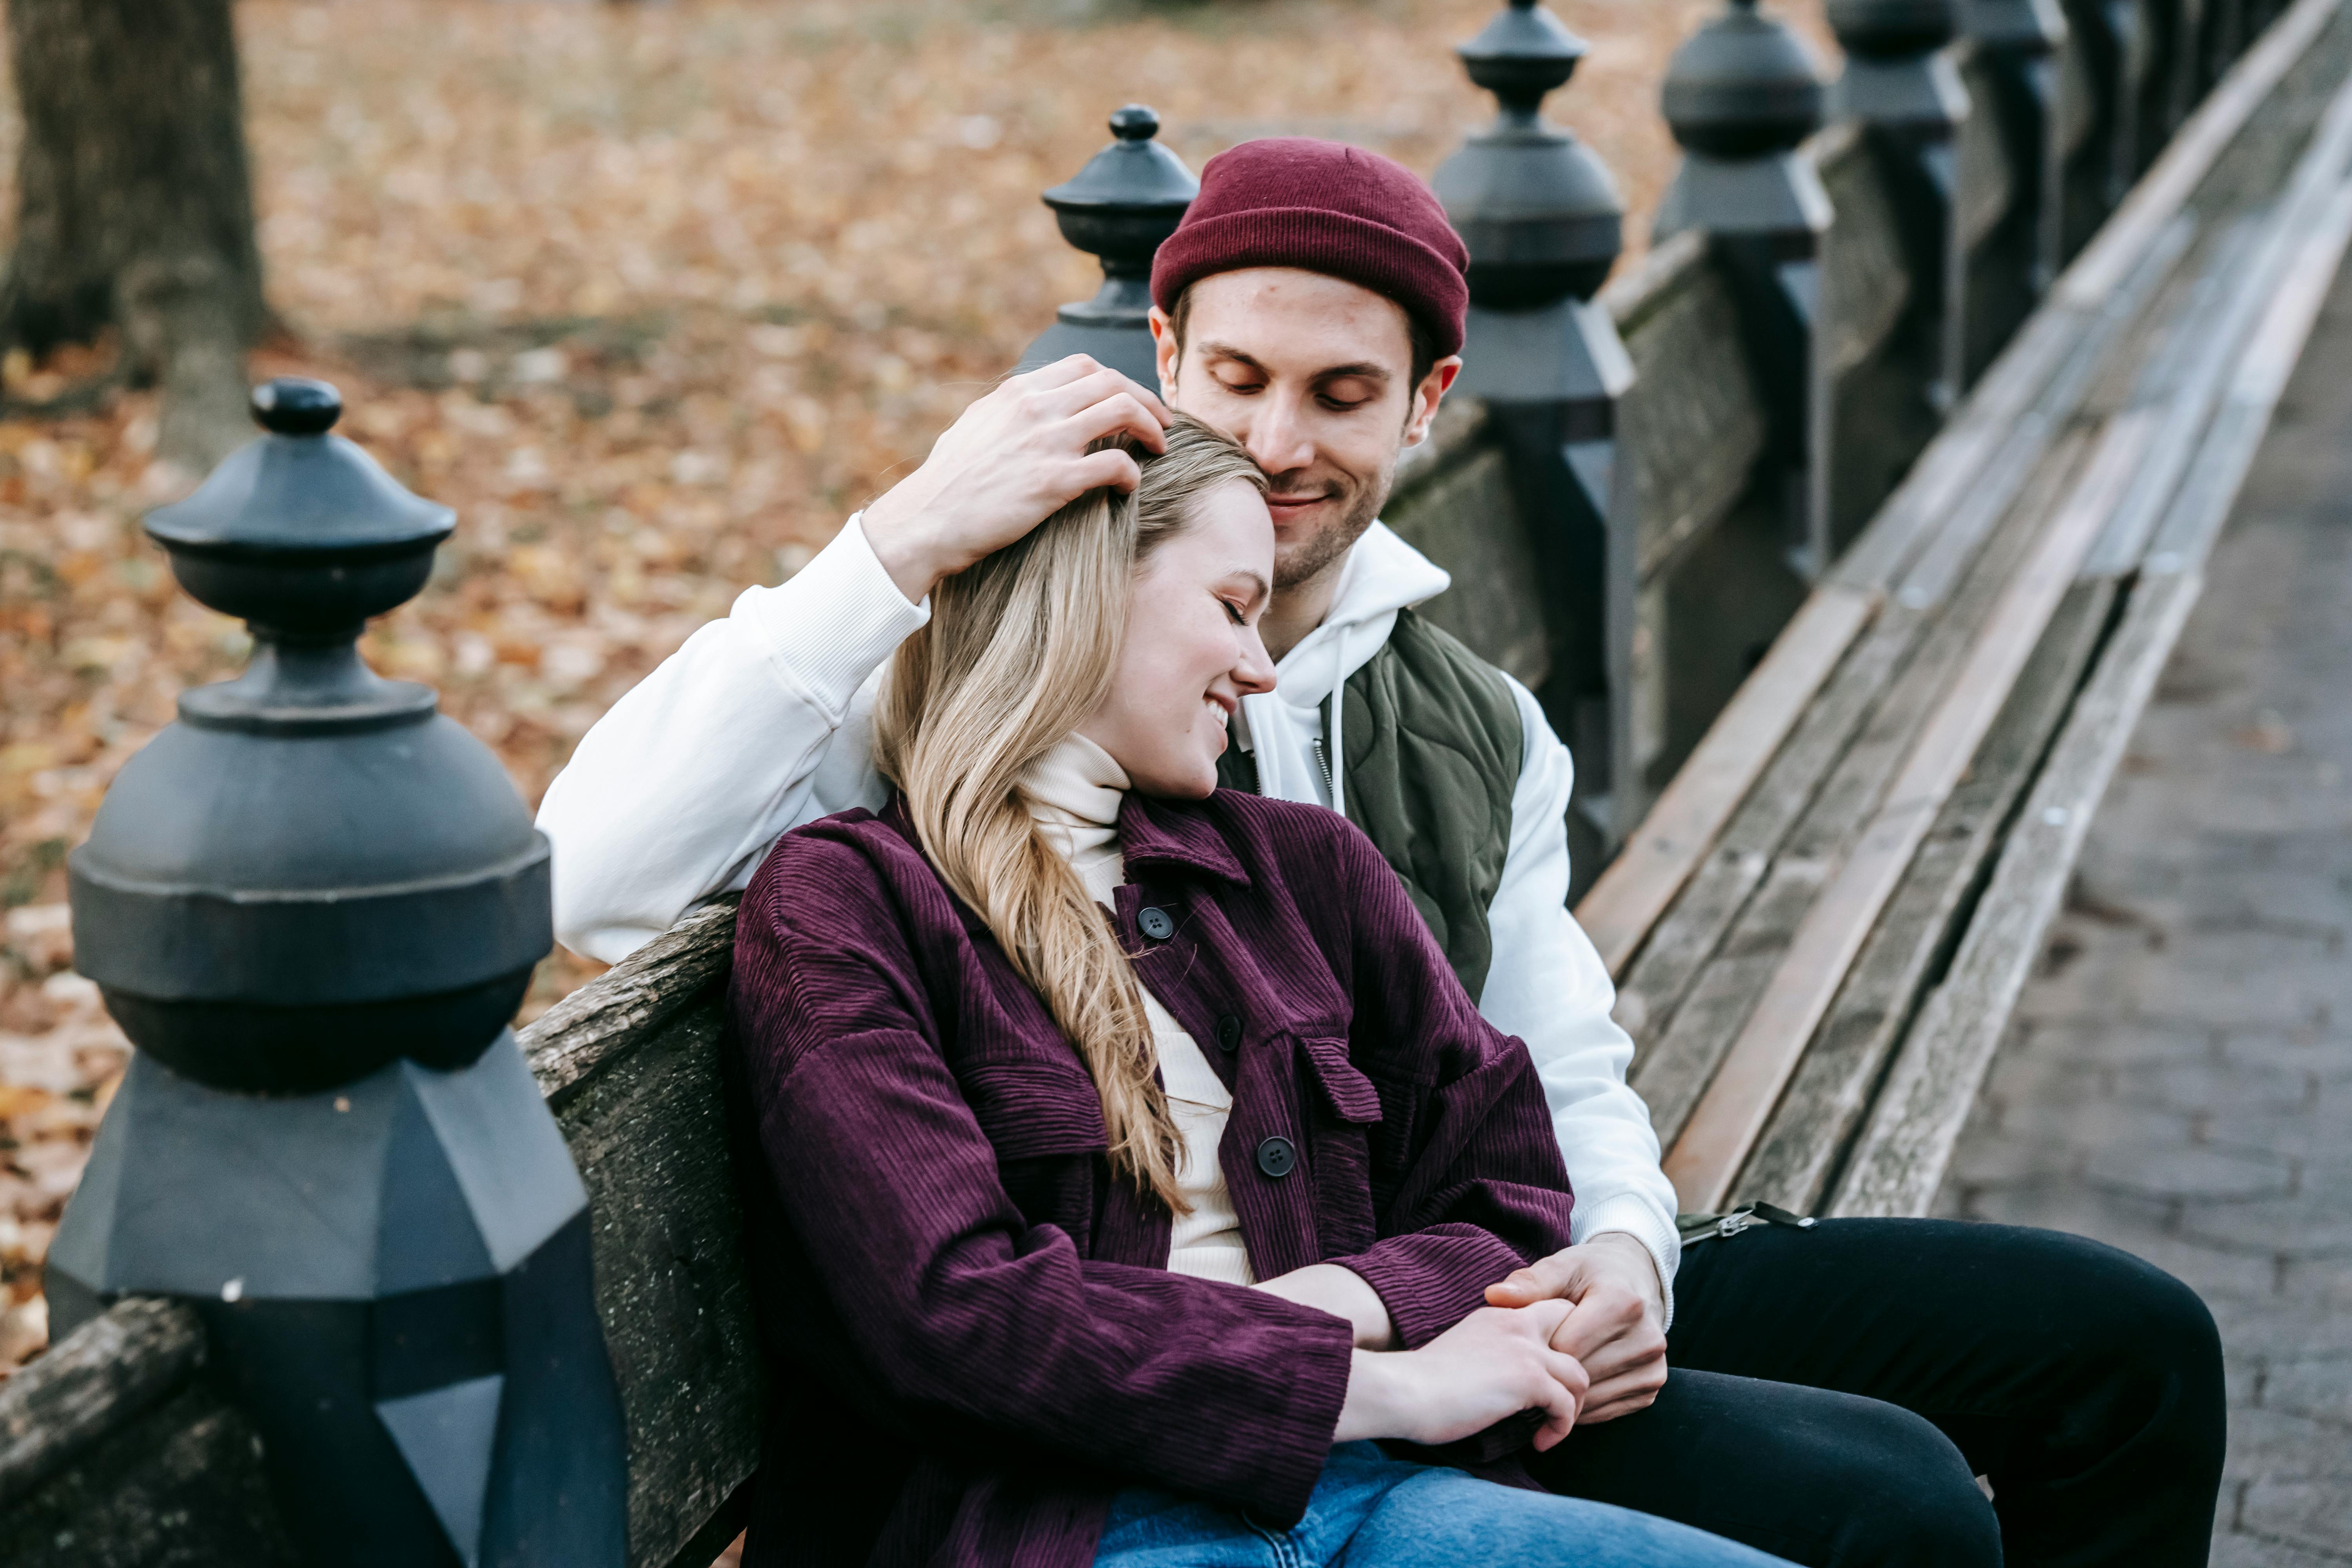 Image of Young Couple With The Masks On Resting In A Bench While Looking  The Phone In The Park-CO508216-Picxy